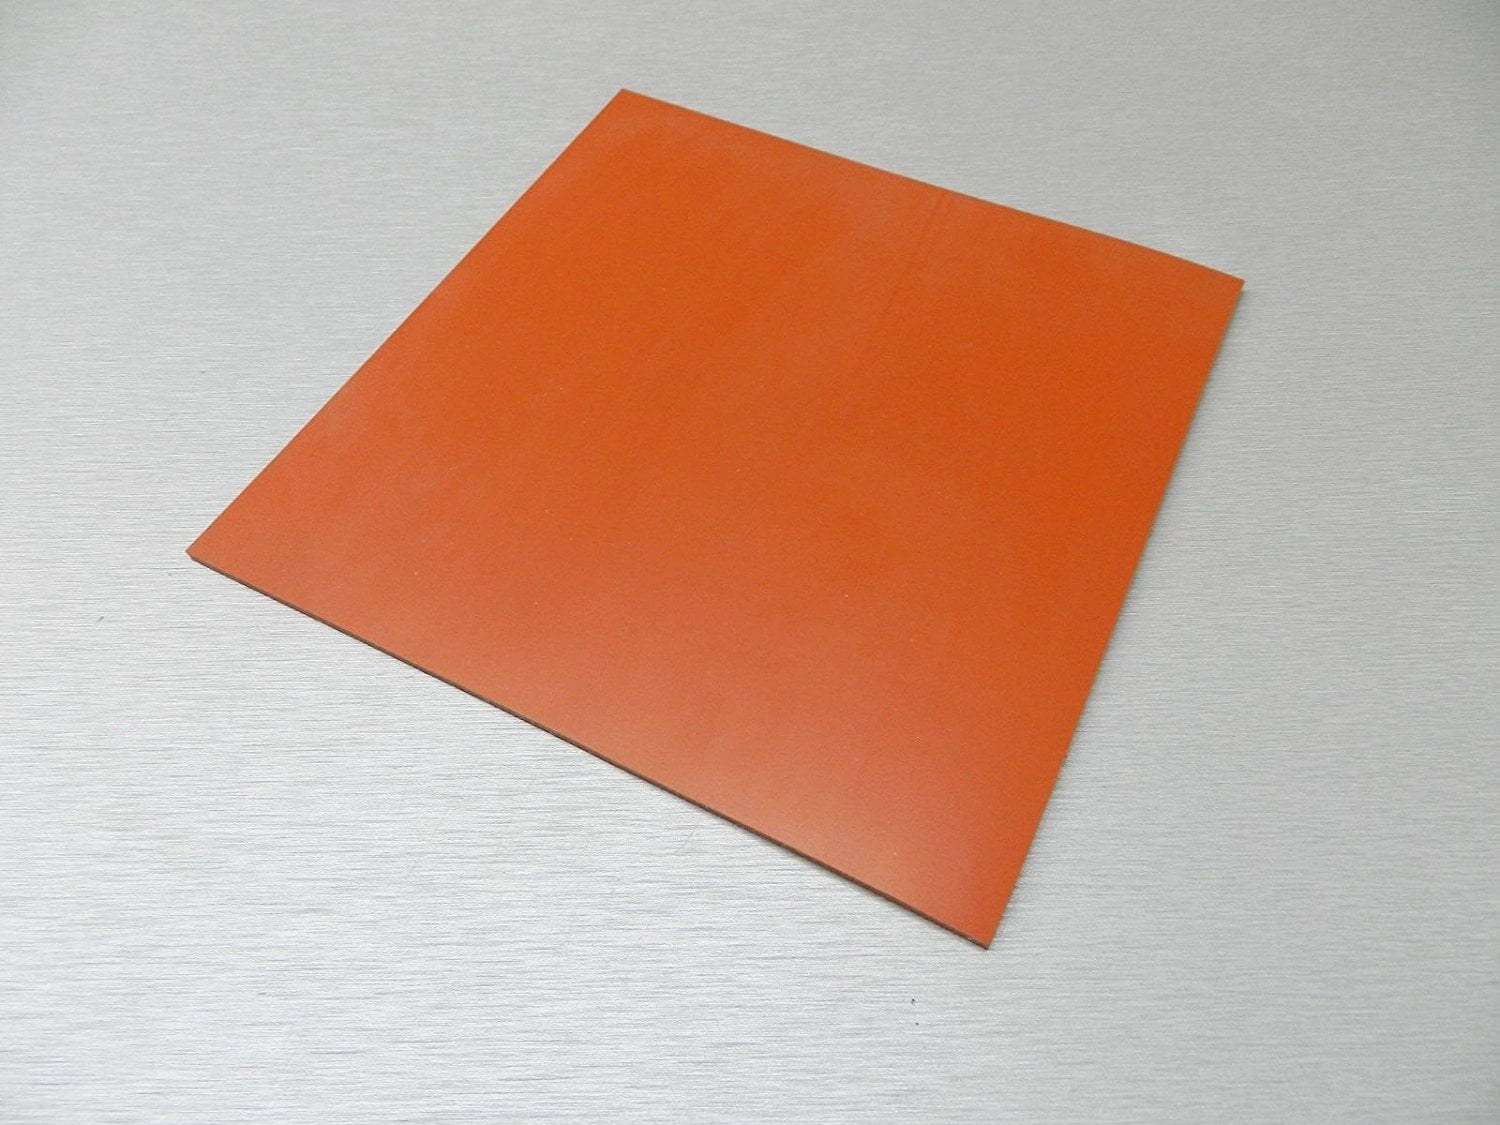 55 durometer High Temp FDA 12" x 12" Red Silicone Rubber Sheet 1/4" thick 